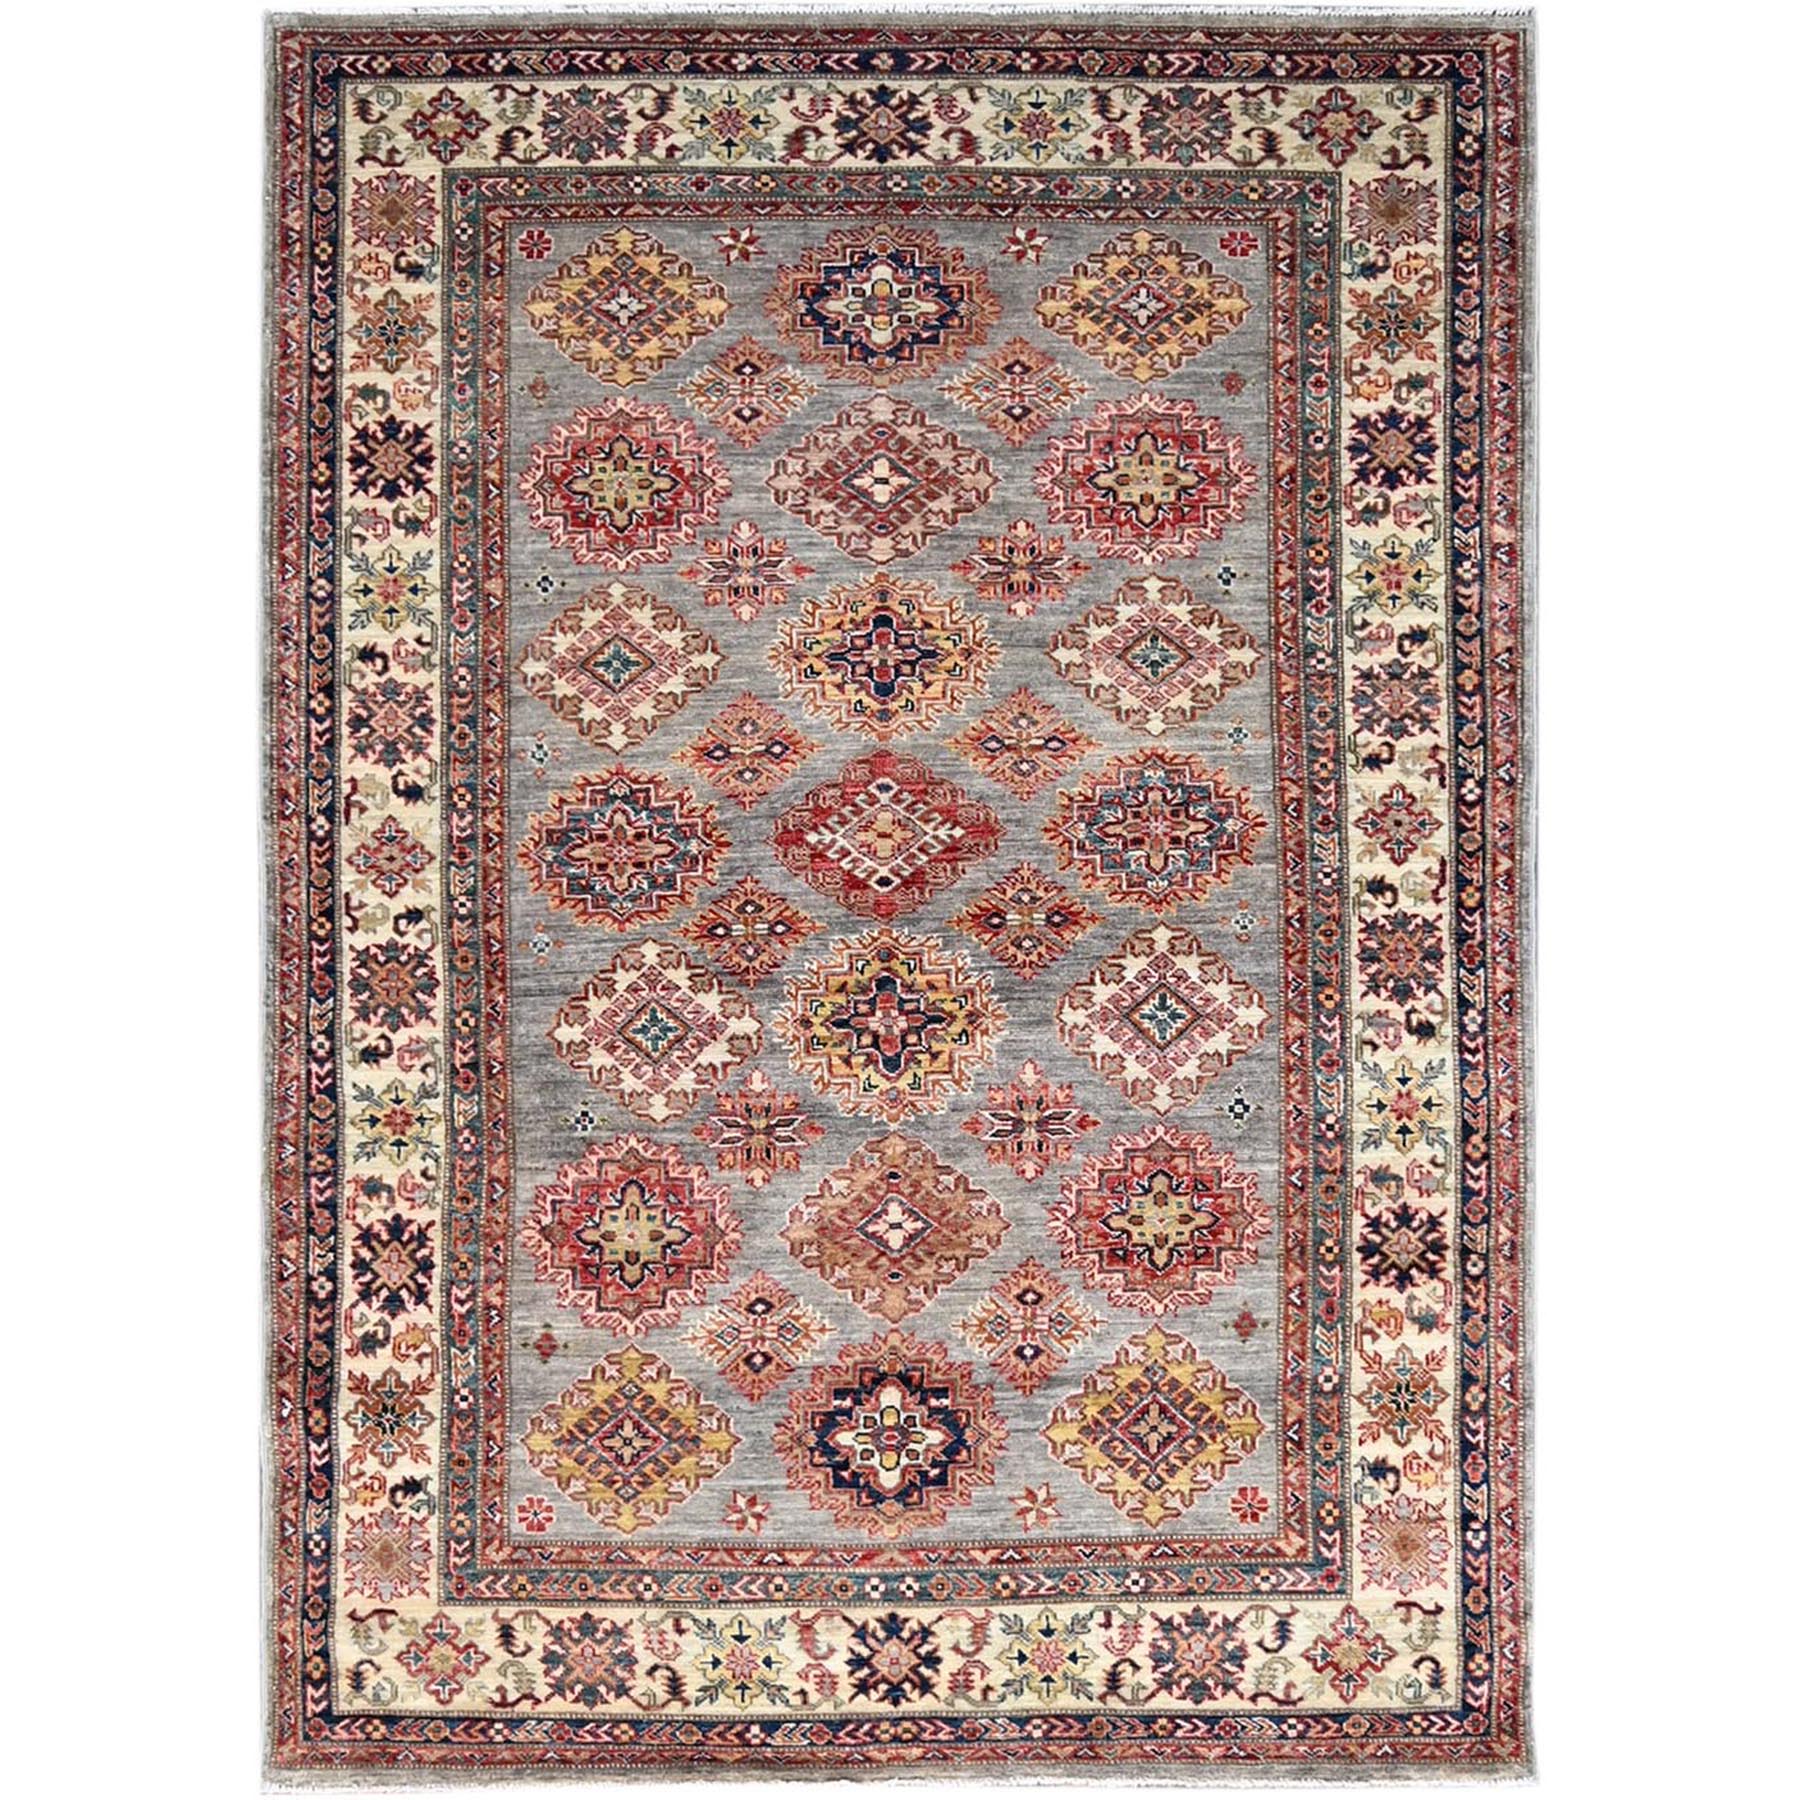 Bunny Gray, Hand Knotted Natural Dyes, Afghan Densely Woven Super Kazak With All Over Design, 100% Wool Oriental Rug